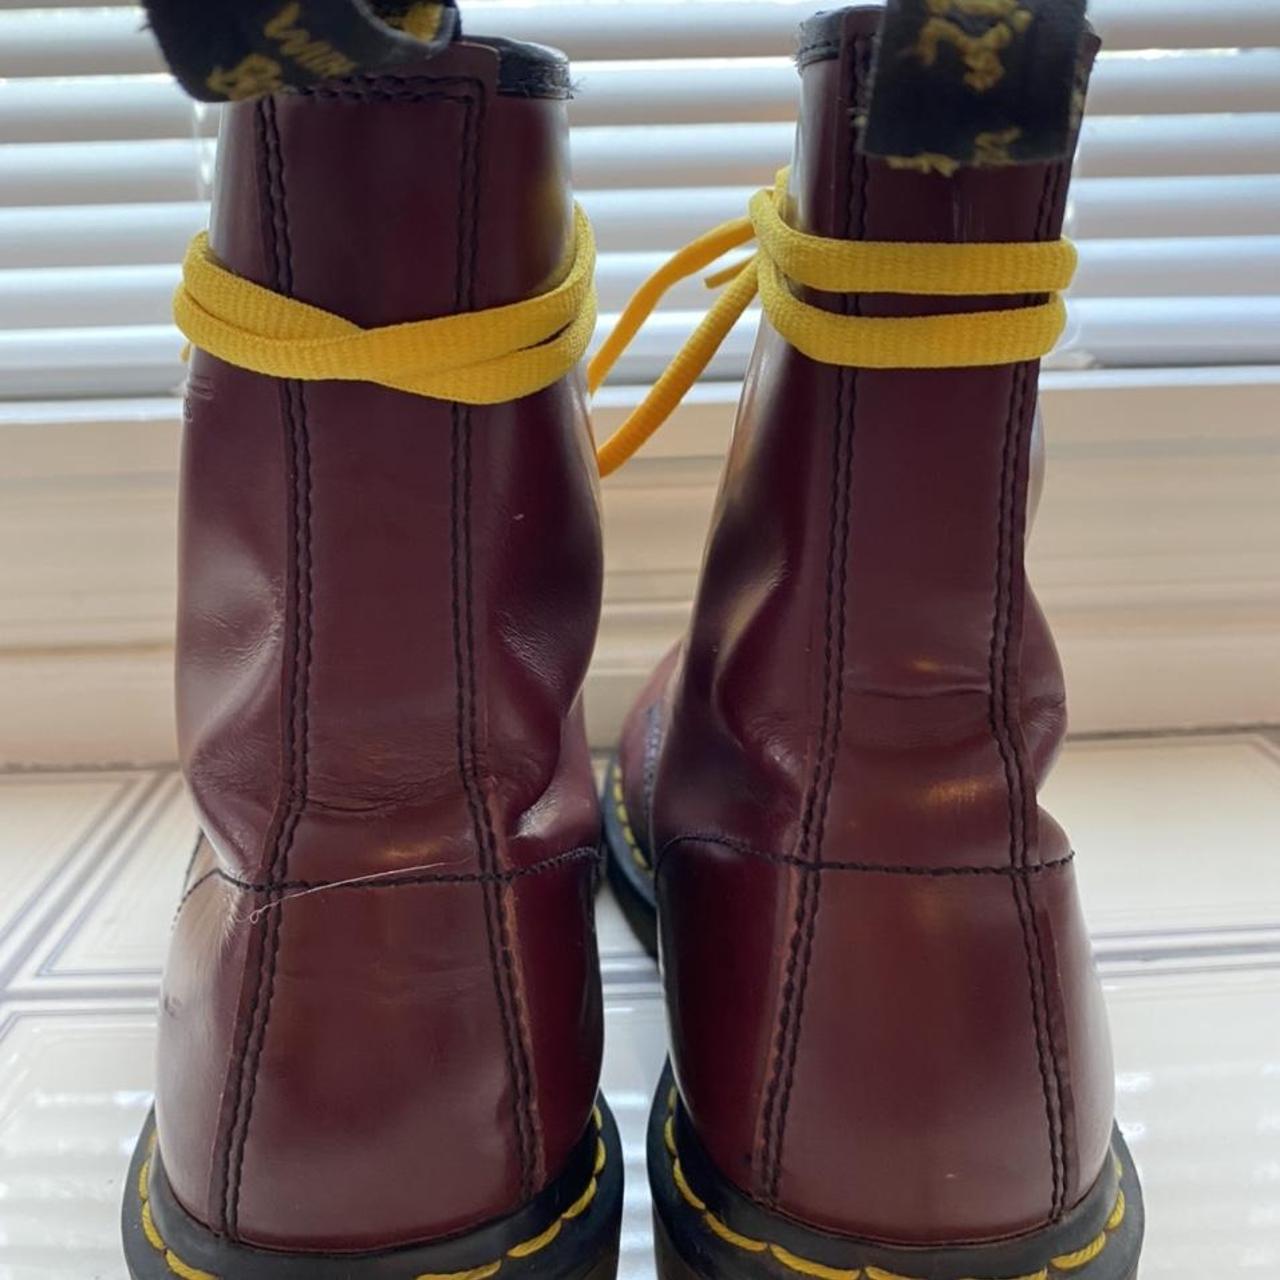 Dr. Martens Men's Burgundy and Red Boots (3)